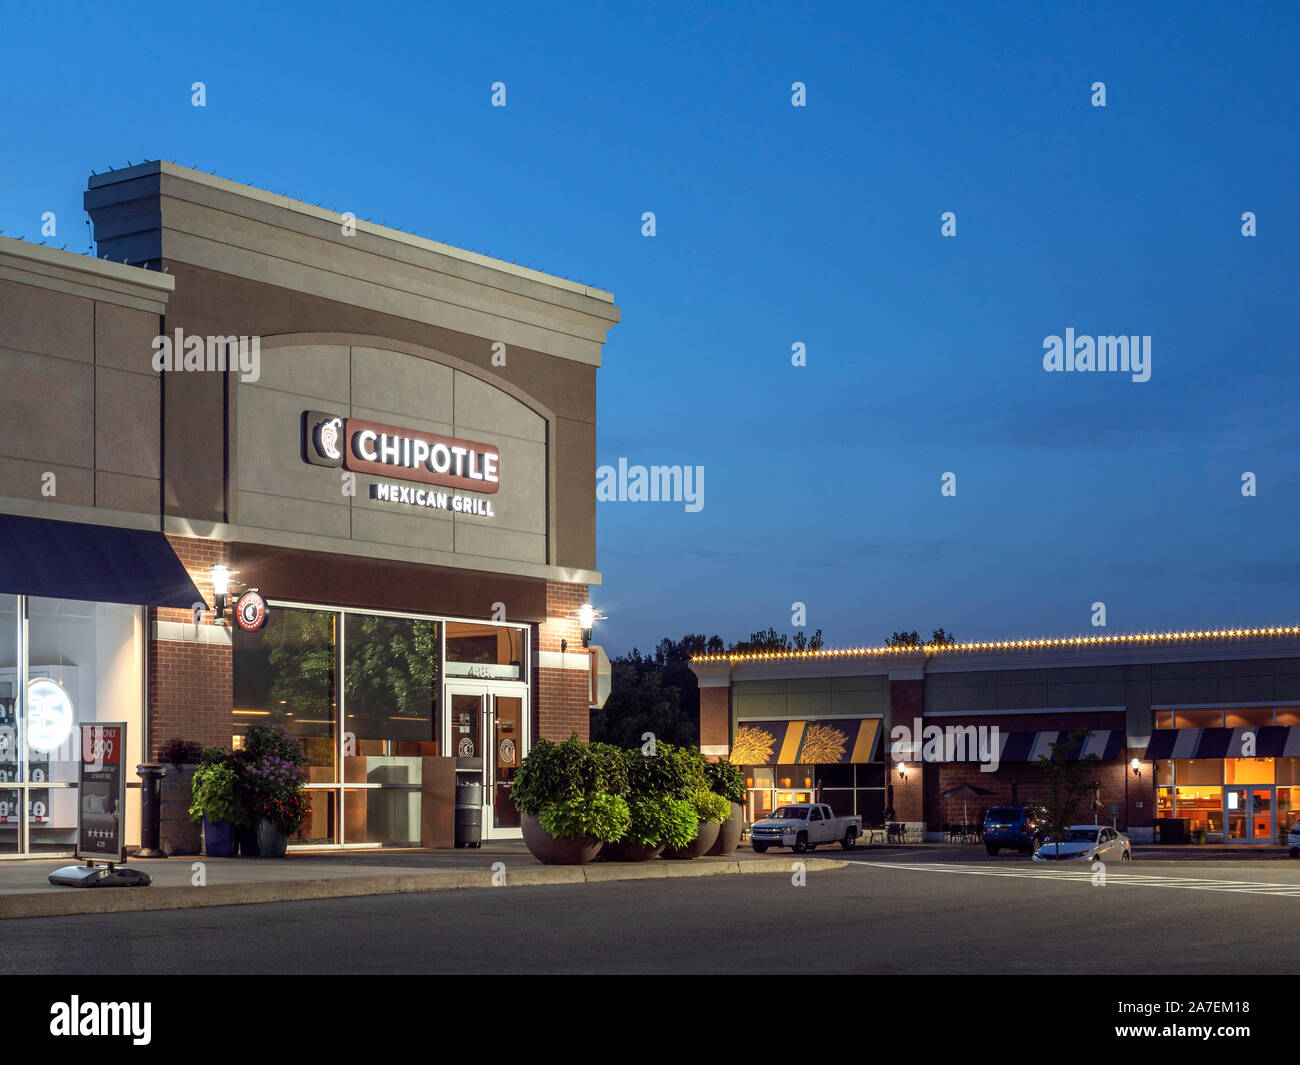 New Hartford, New York - Aug 18, 2019: Vertical 4:3 Night View of Chipotle Maxican Grill Restaurant, Chipotle is an American Fast Food Brand Specializ Stock Photo